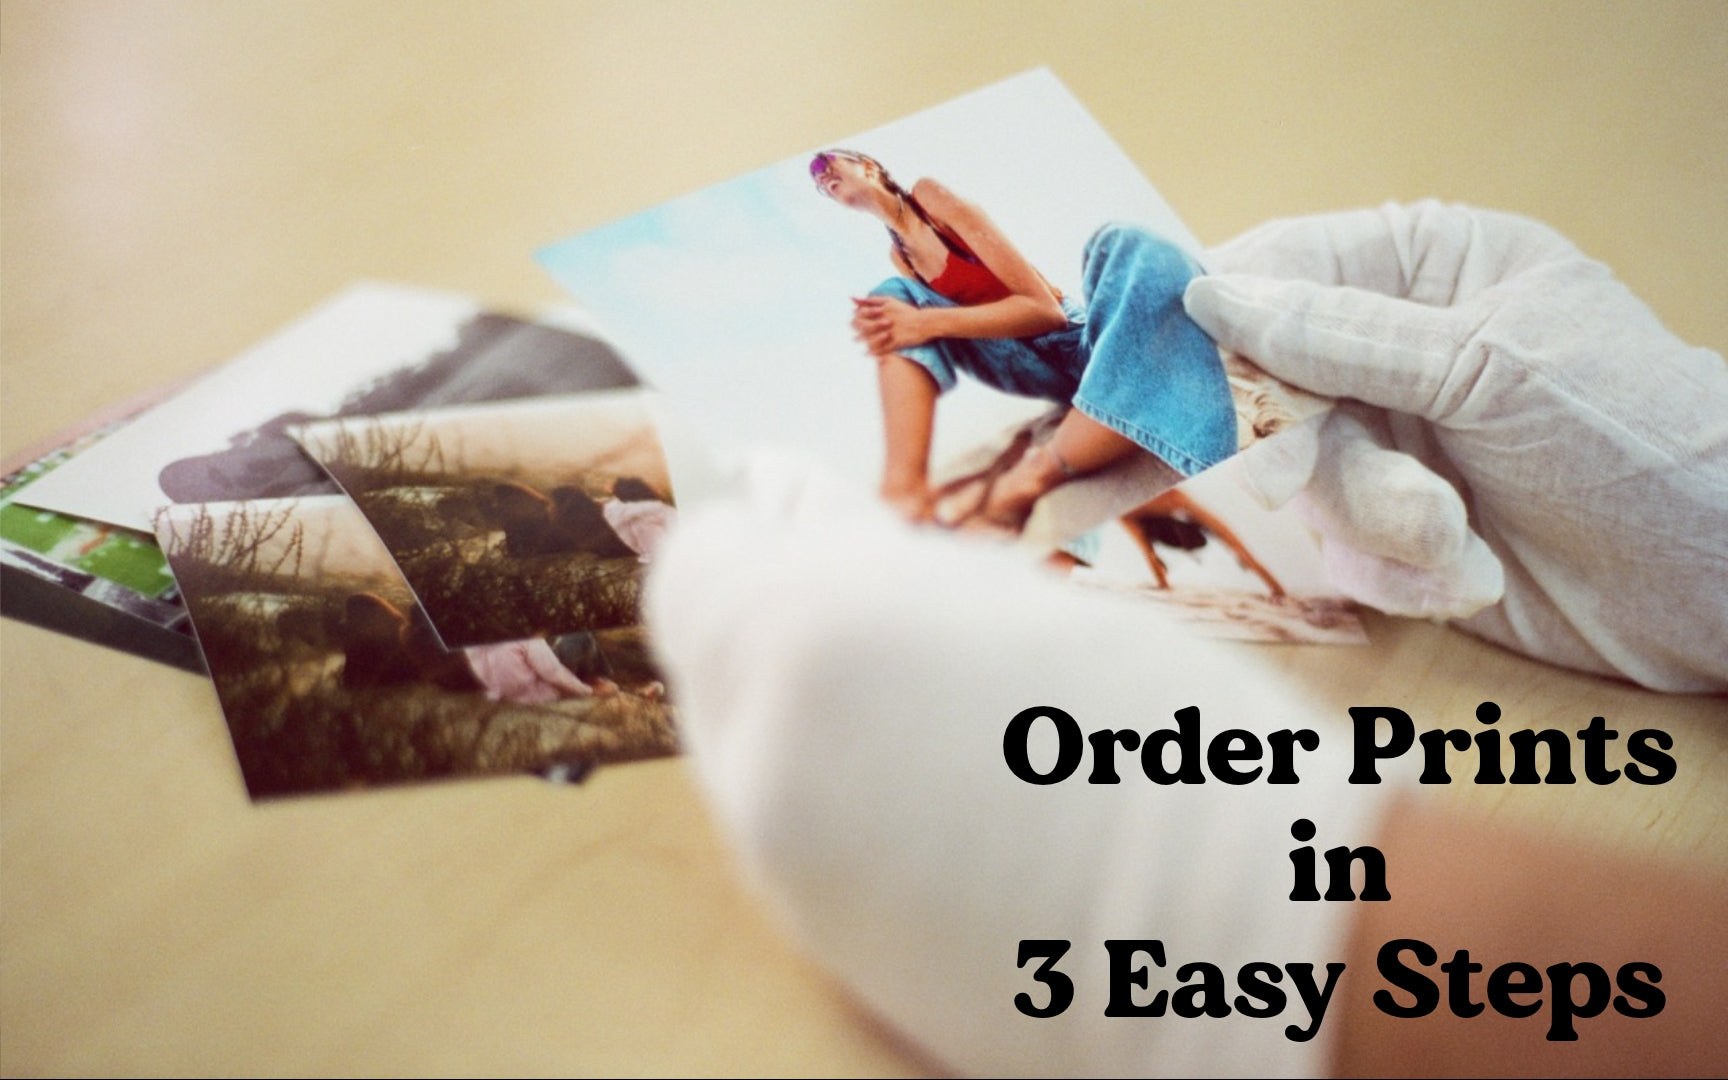 Load video: How to order prints